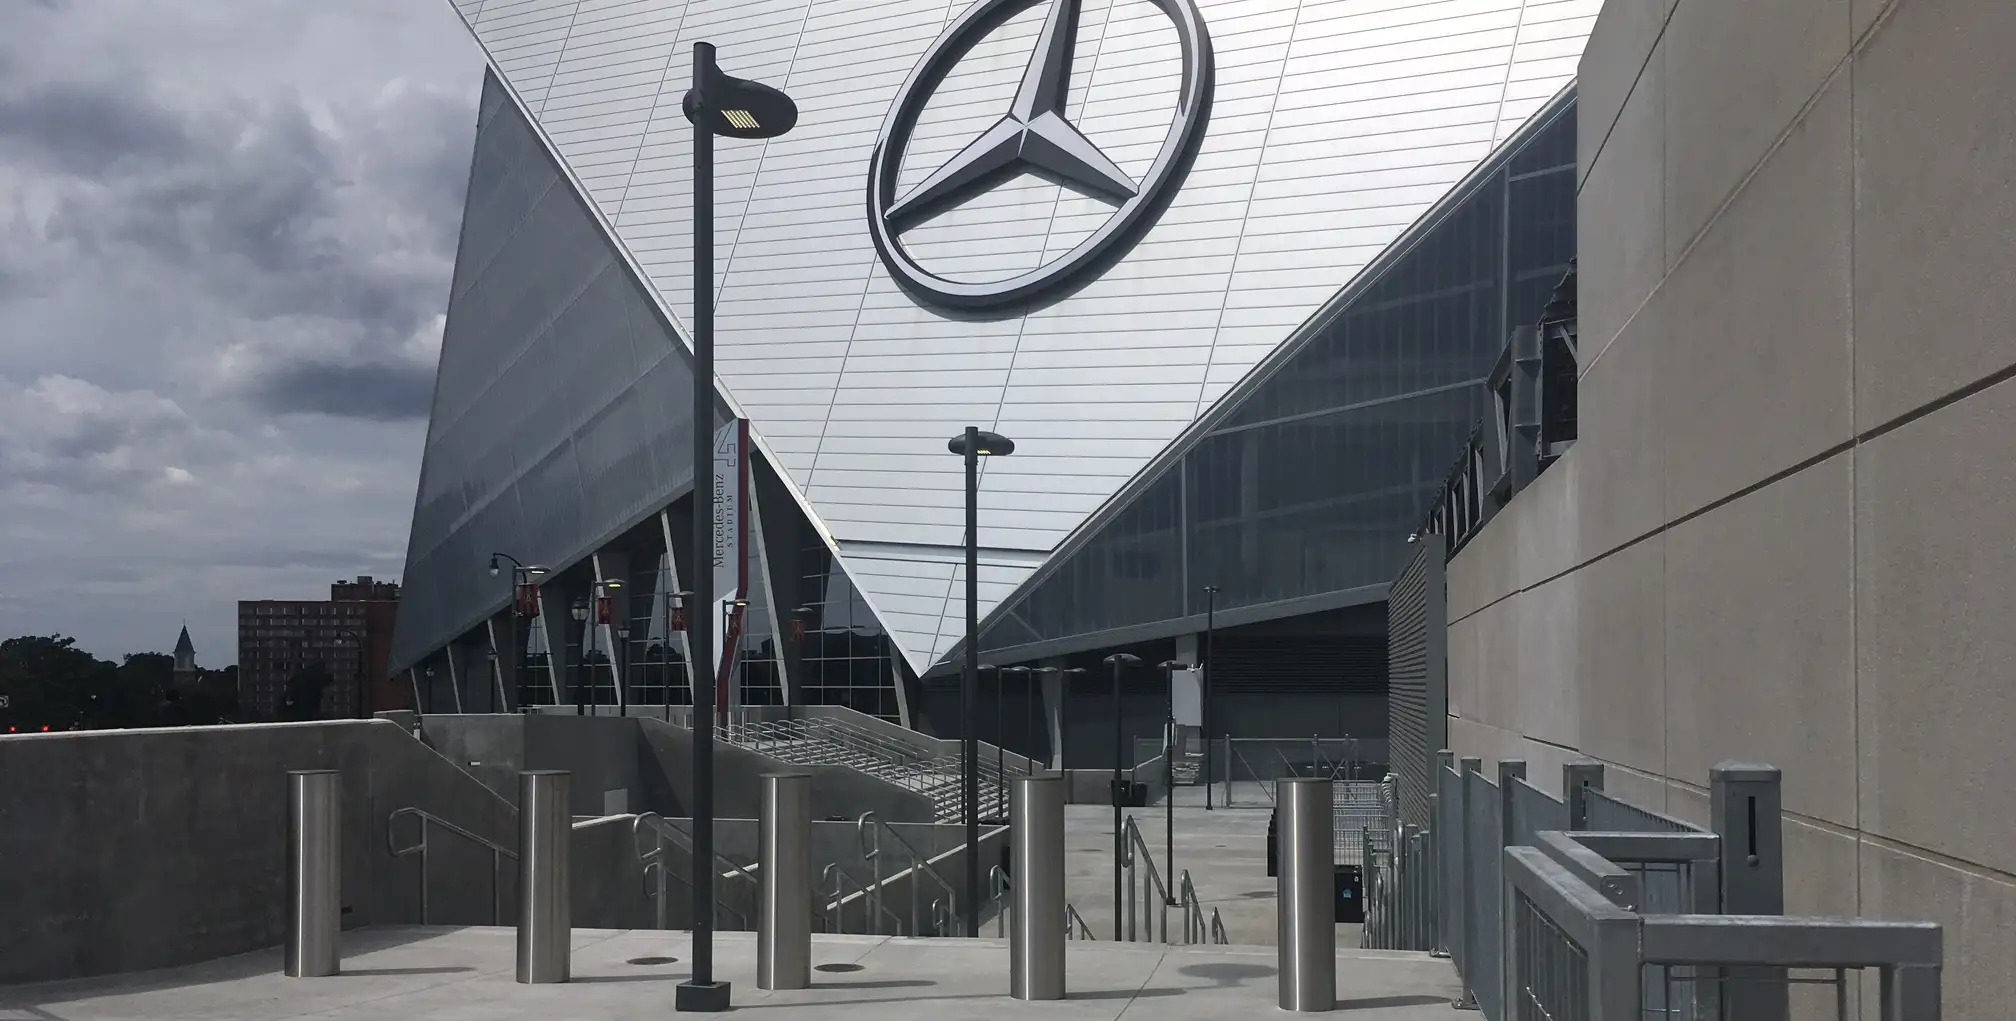 An architectural view of a stadium entrance featuring a large Mercedes-Benz logo, with a row of stainless steel security bollards by Delta Scientific, ensuring a secure yet welcoming pathway for visitors.